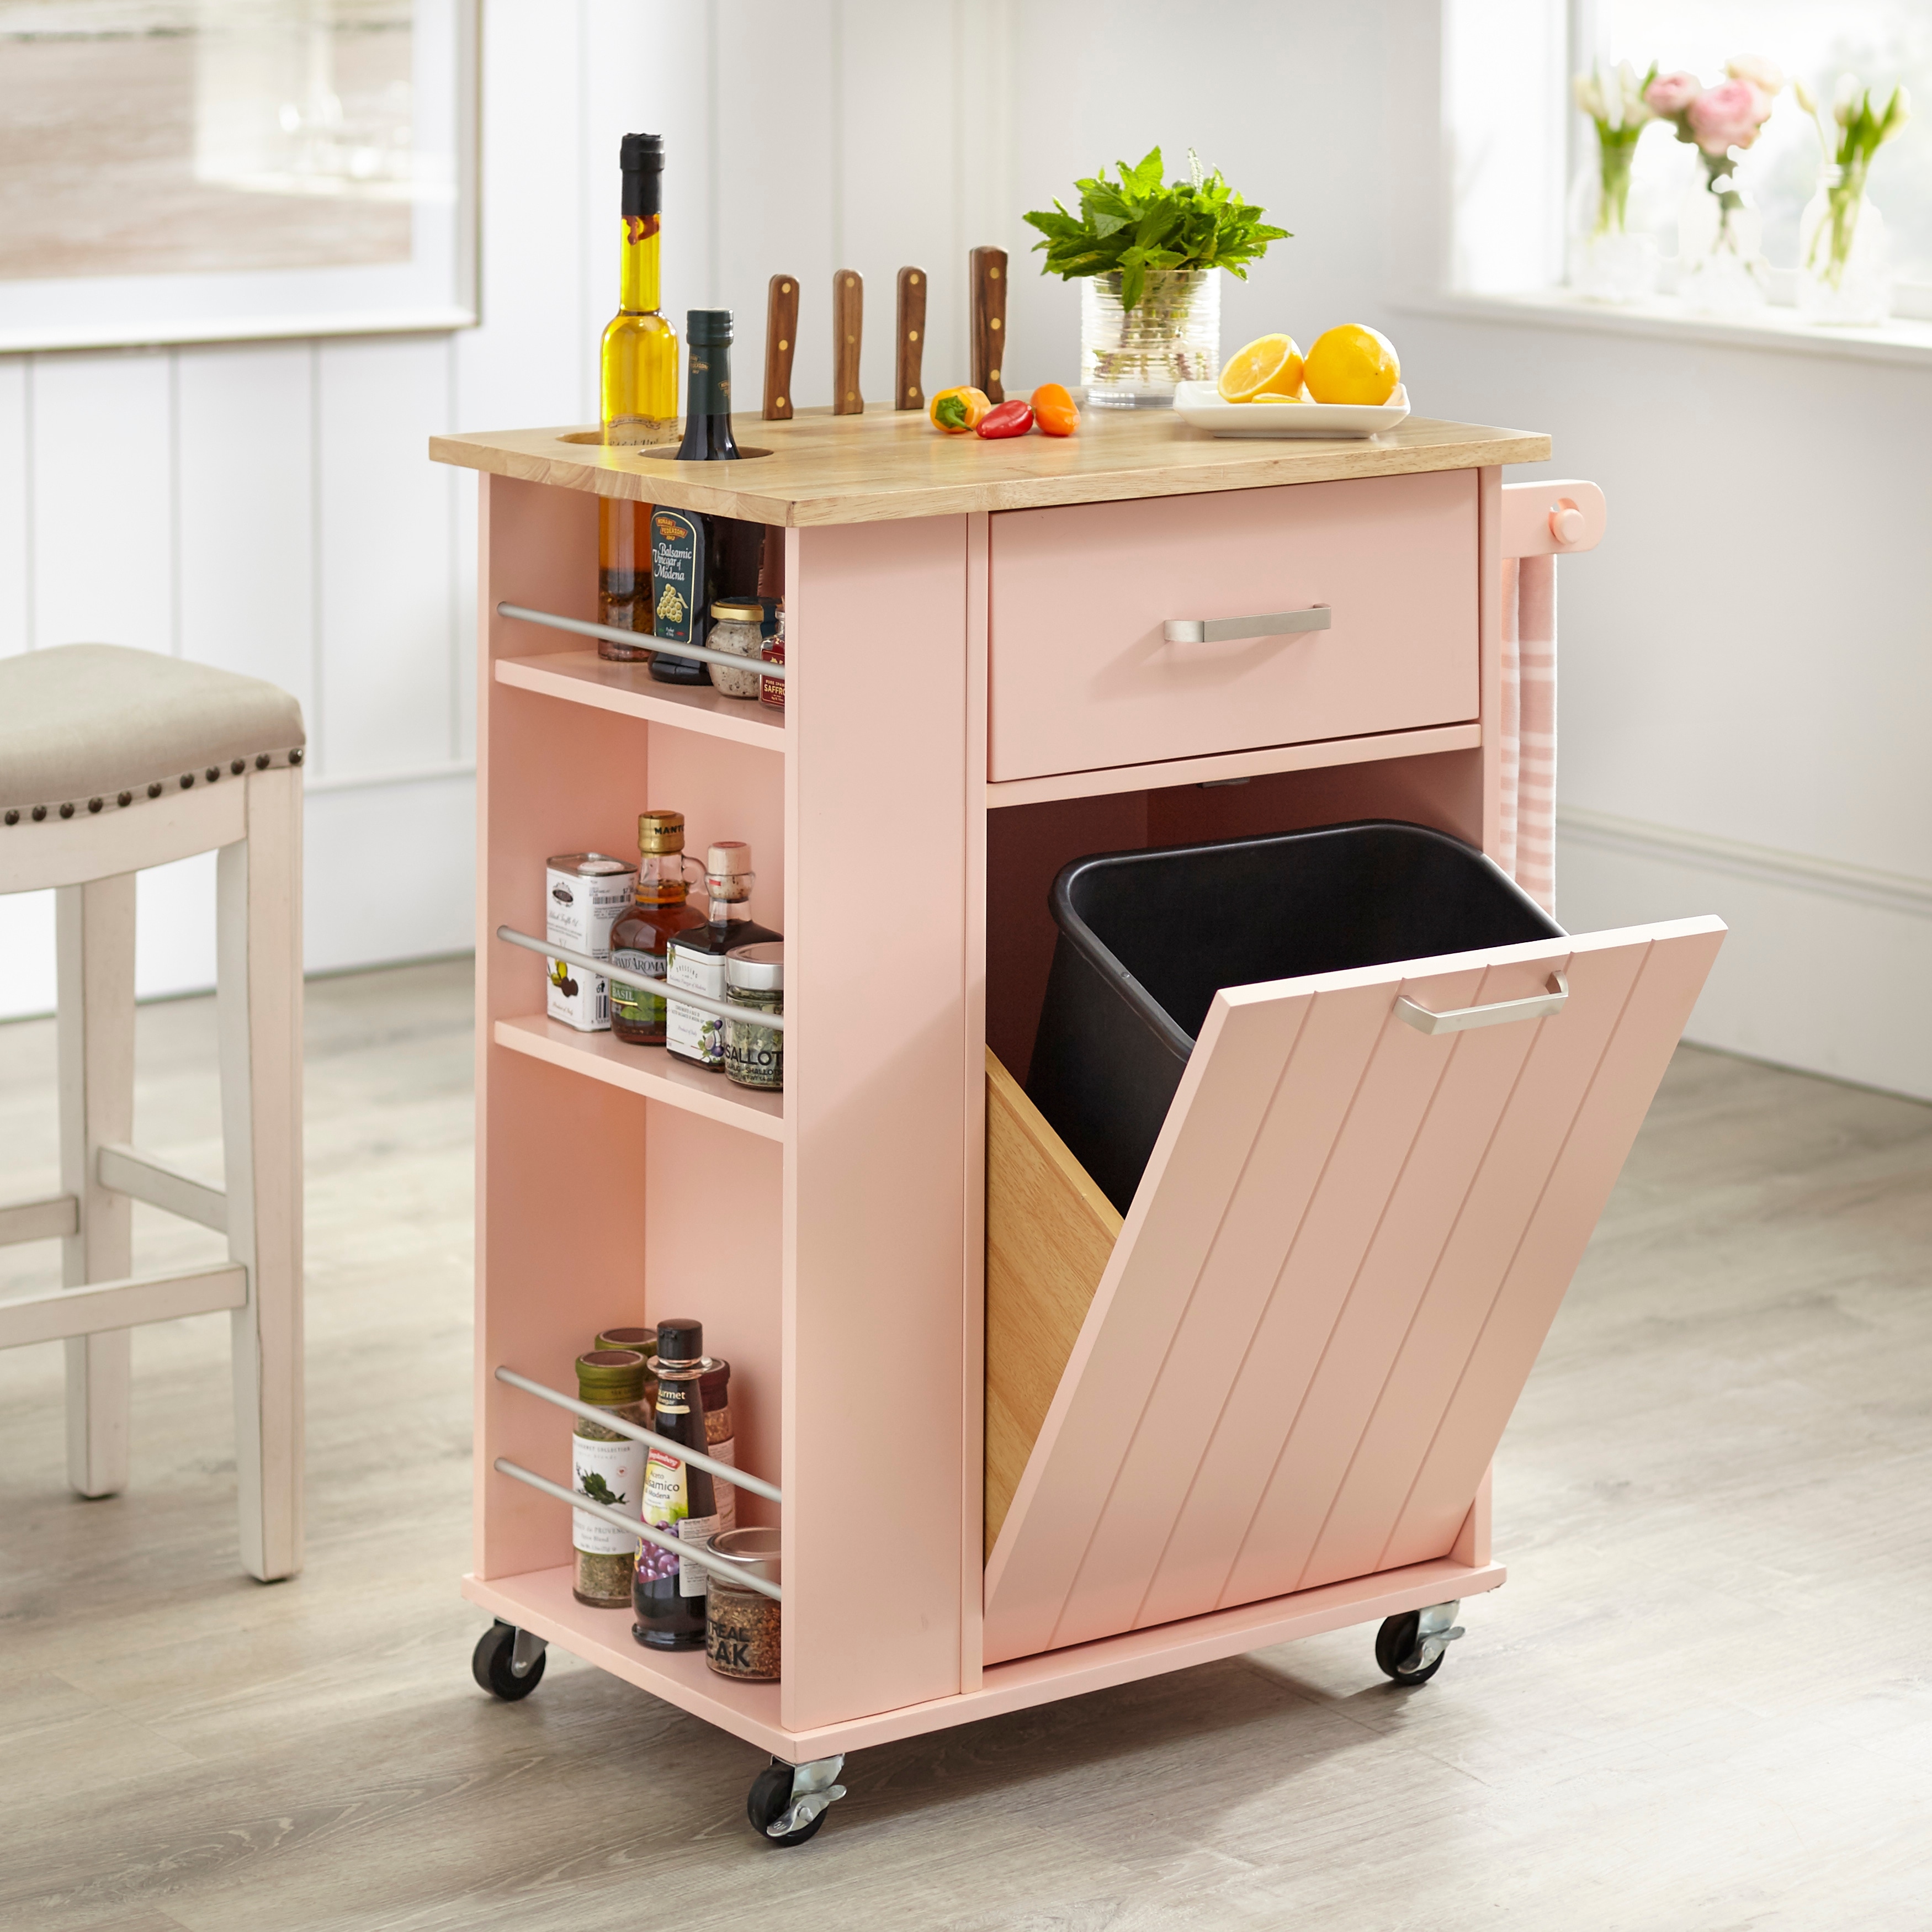 https://ak1.ostkcdn.com/images/products/is/images/direct/a2453959e63dc73b028800860c08aff0f5fbb3b2/Simple-Living-Lima-Kitchen-Cart.jpg